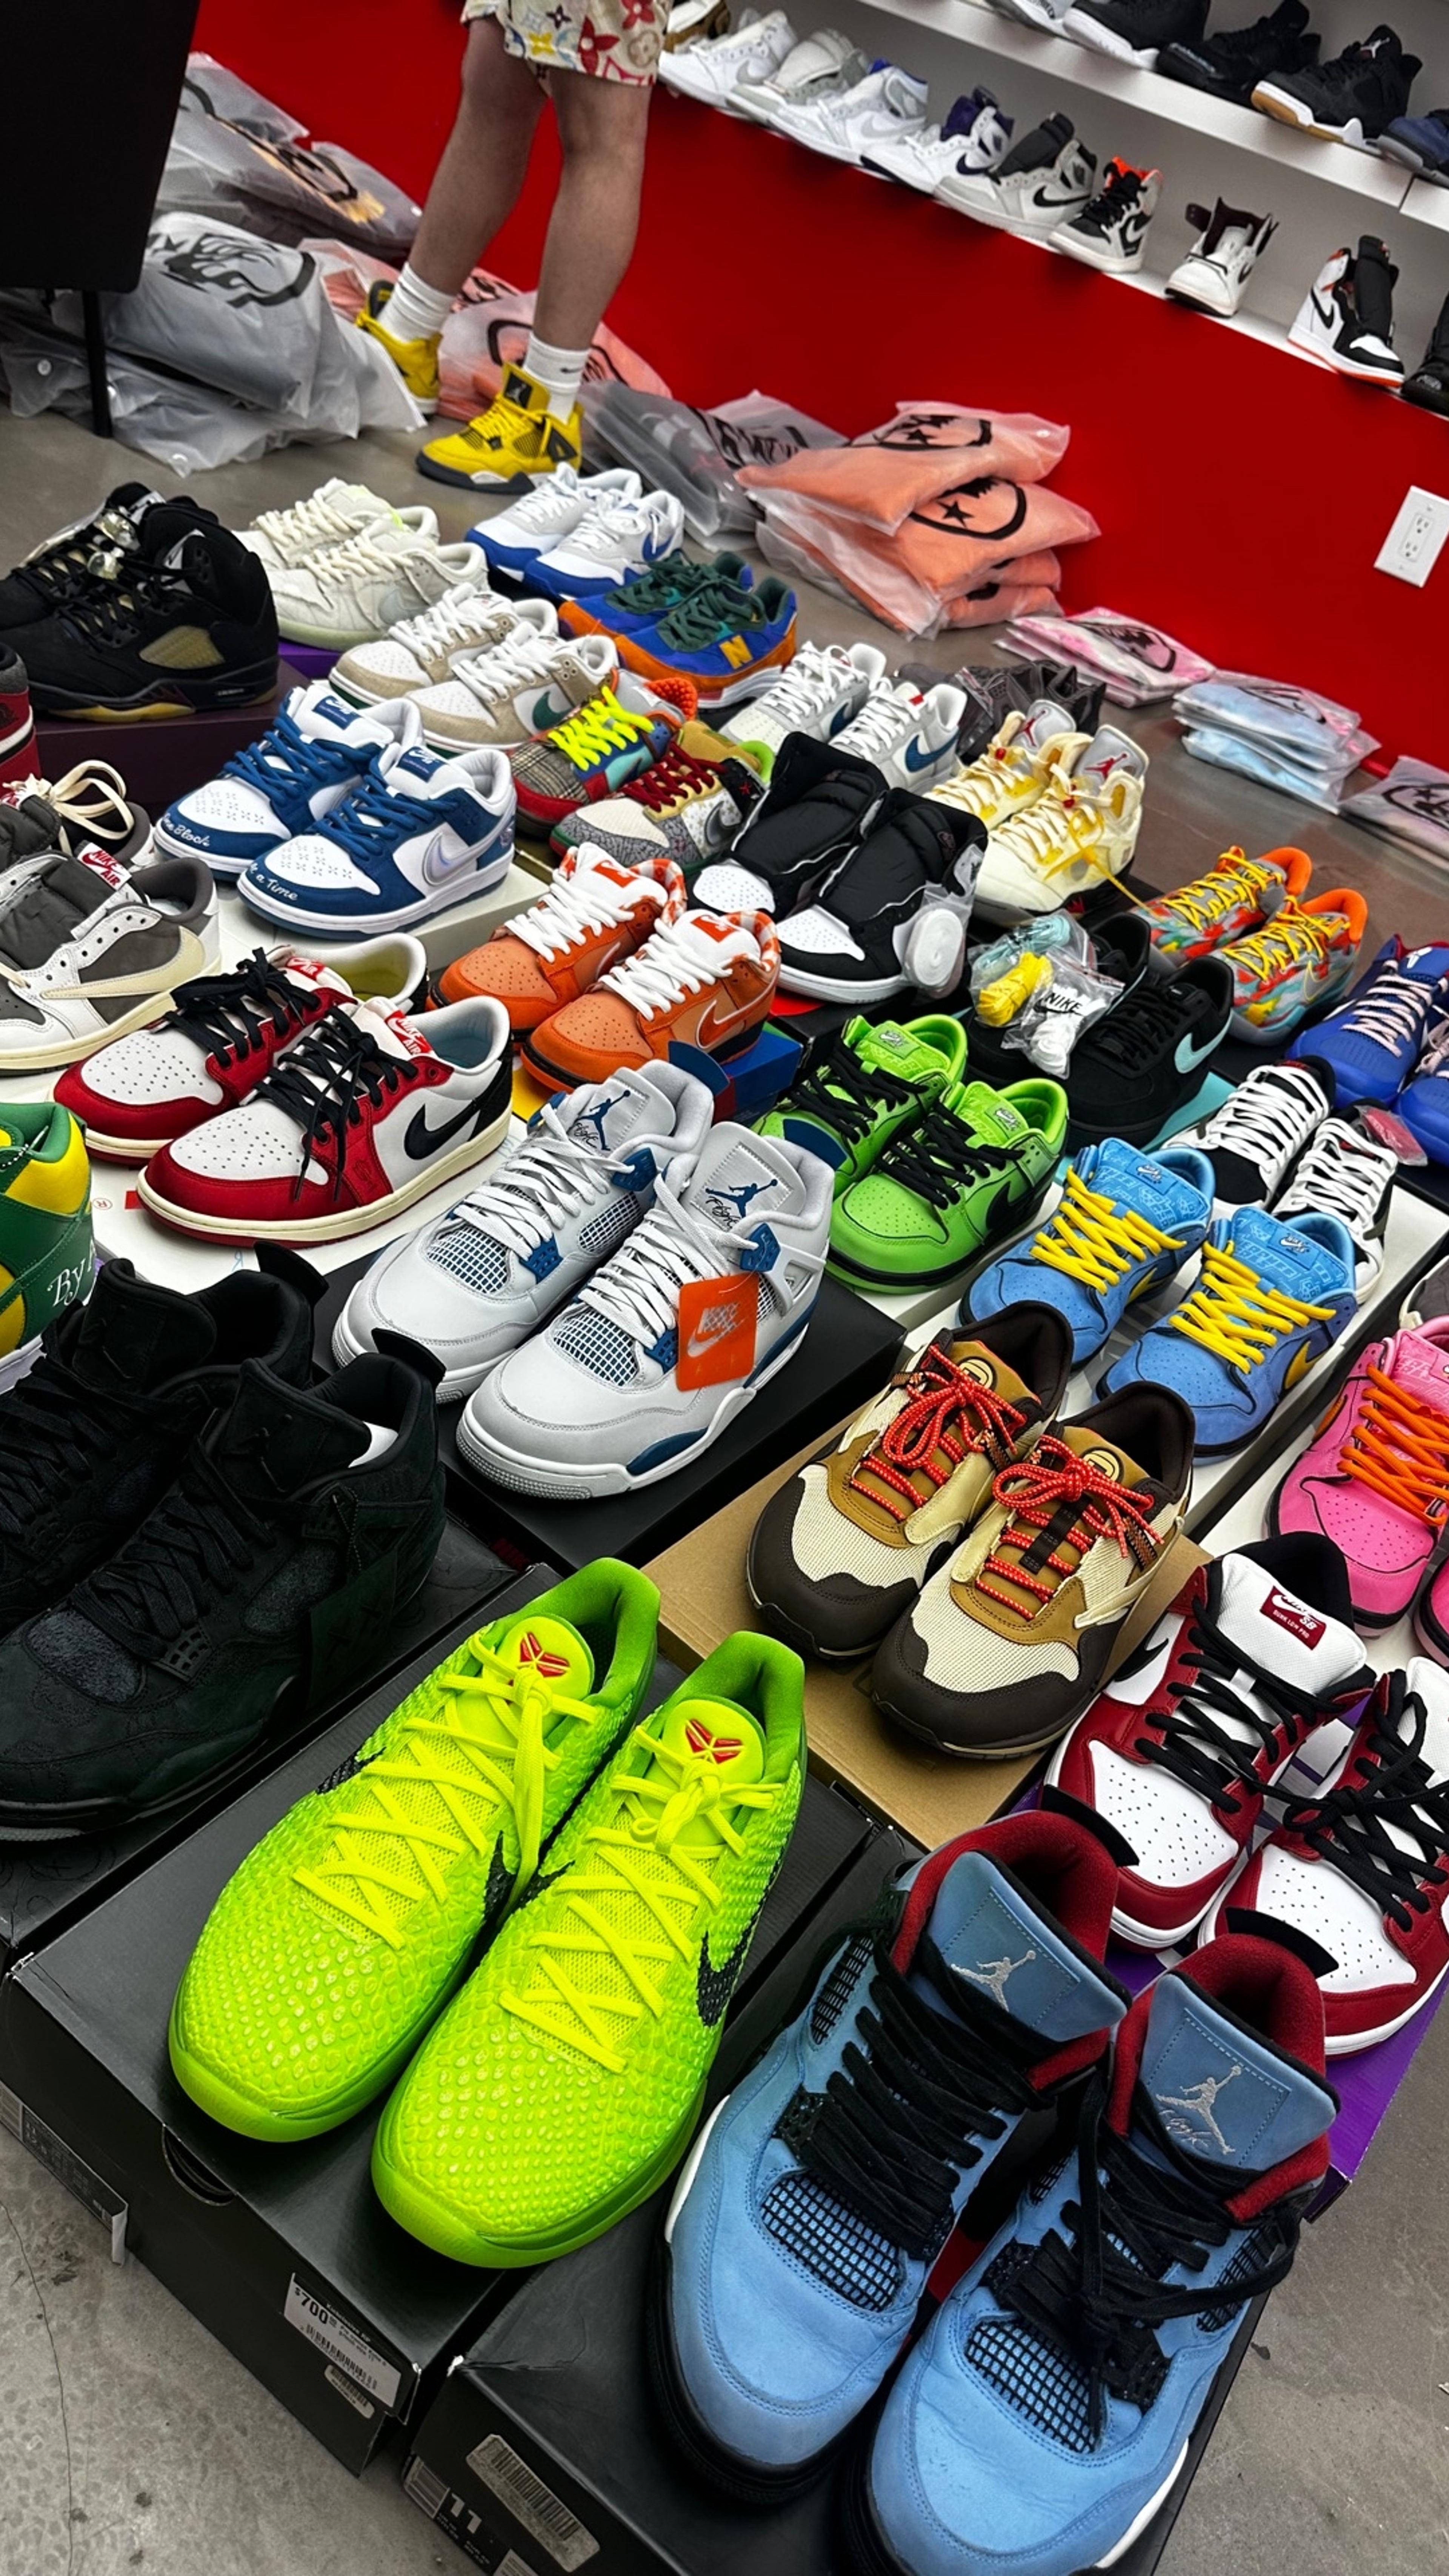 Preview image for the show titled "Quick Sneakers $1 auctions! EVERYTHING MUST GO! " at Tomorrow @ 12:00 AM